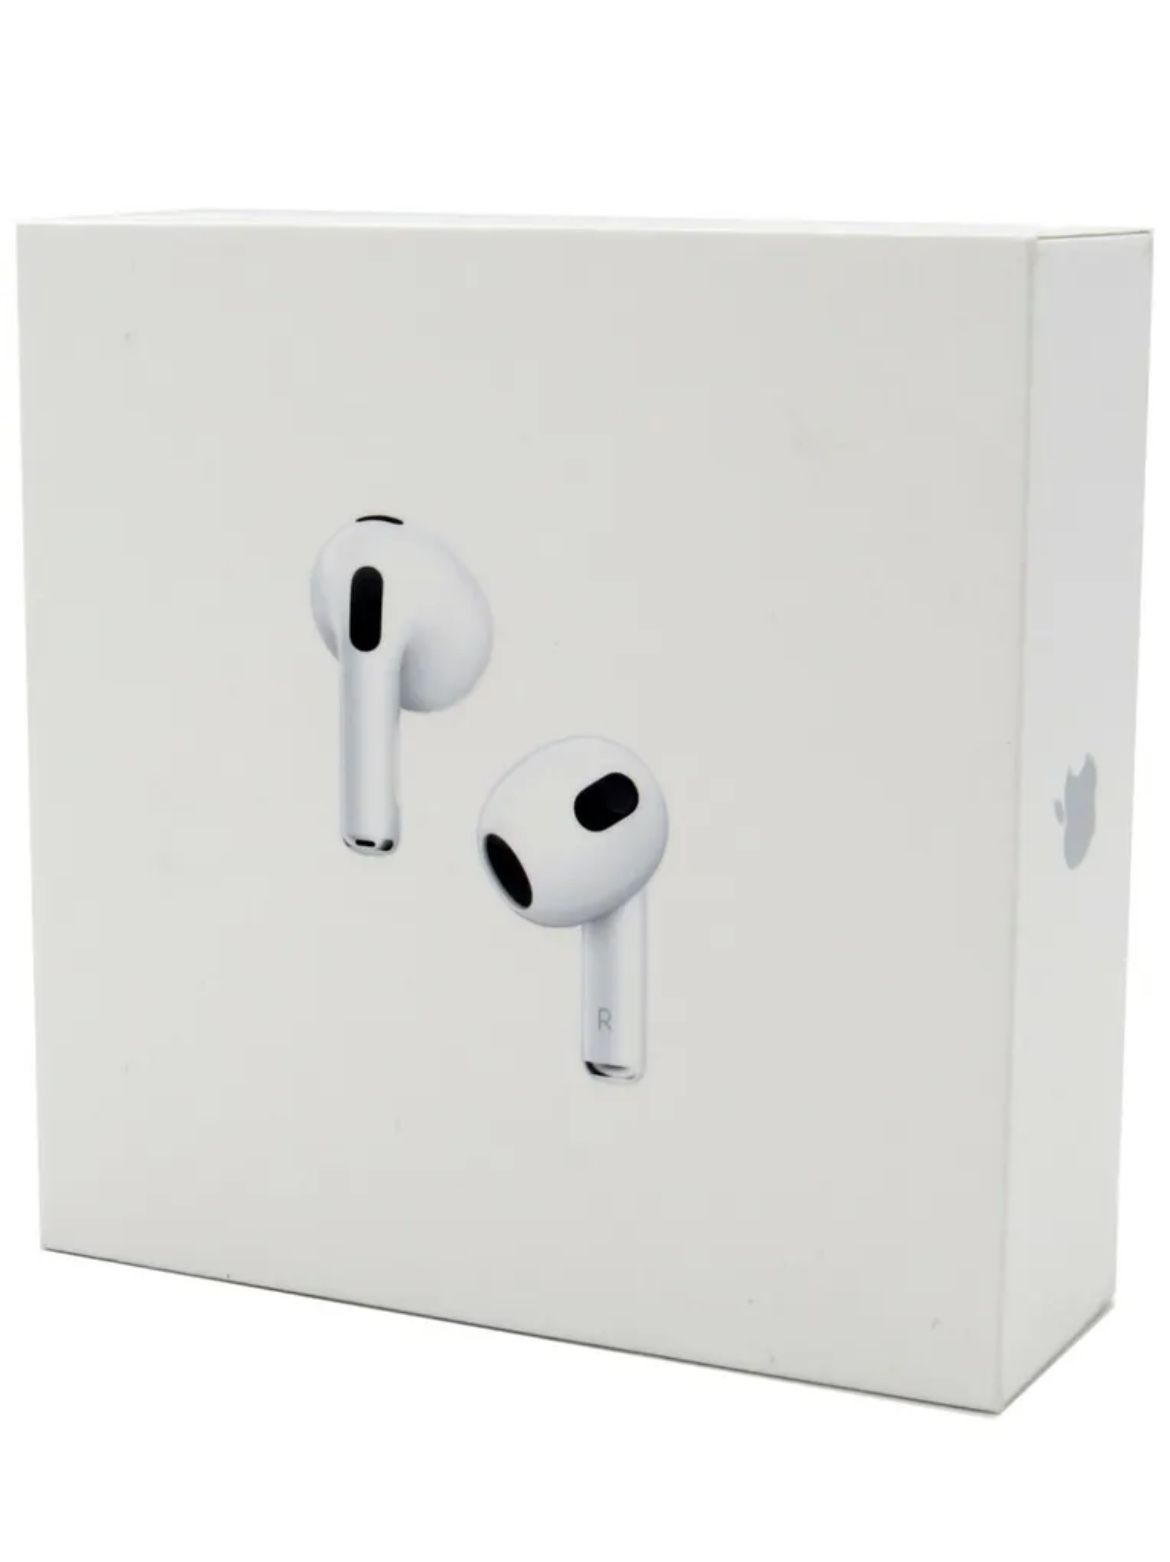 SEND BEST OFFER! AirPods (3rd generation) *NEW*